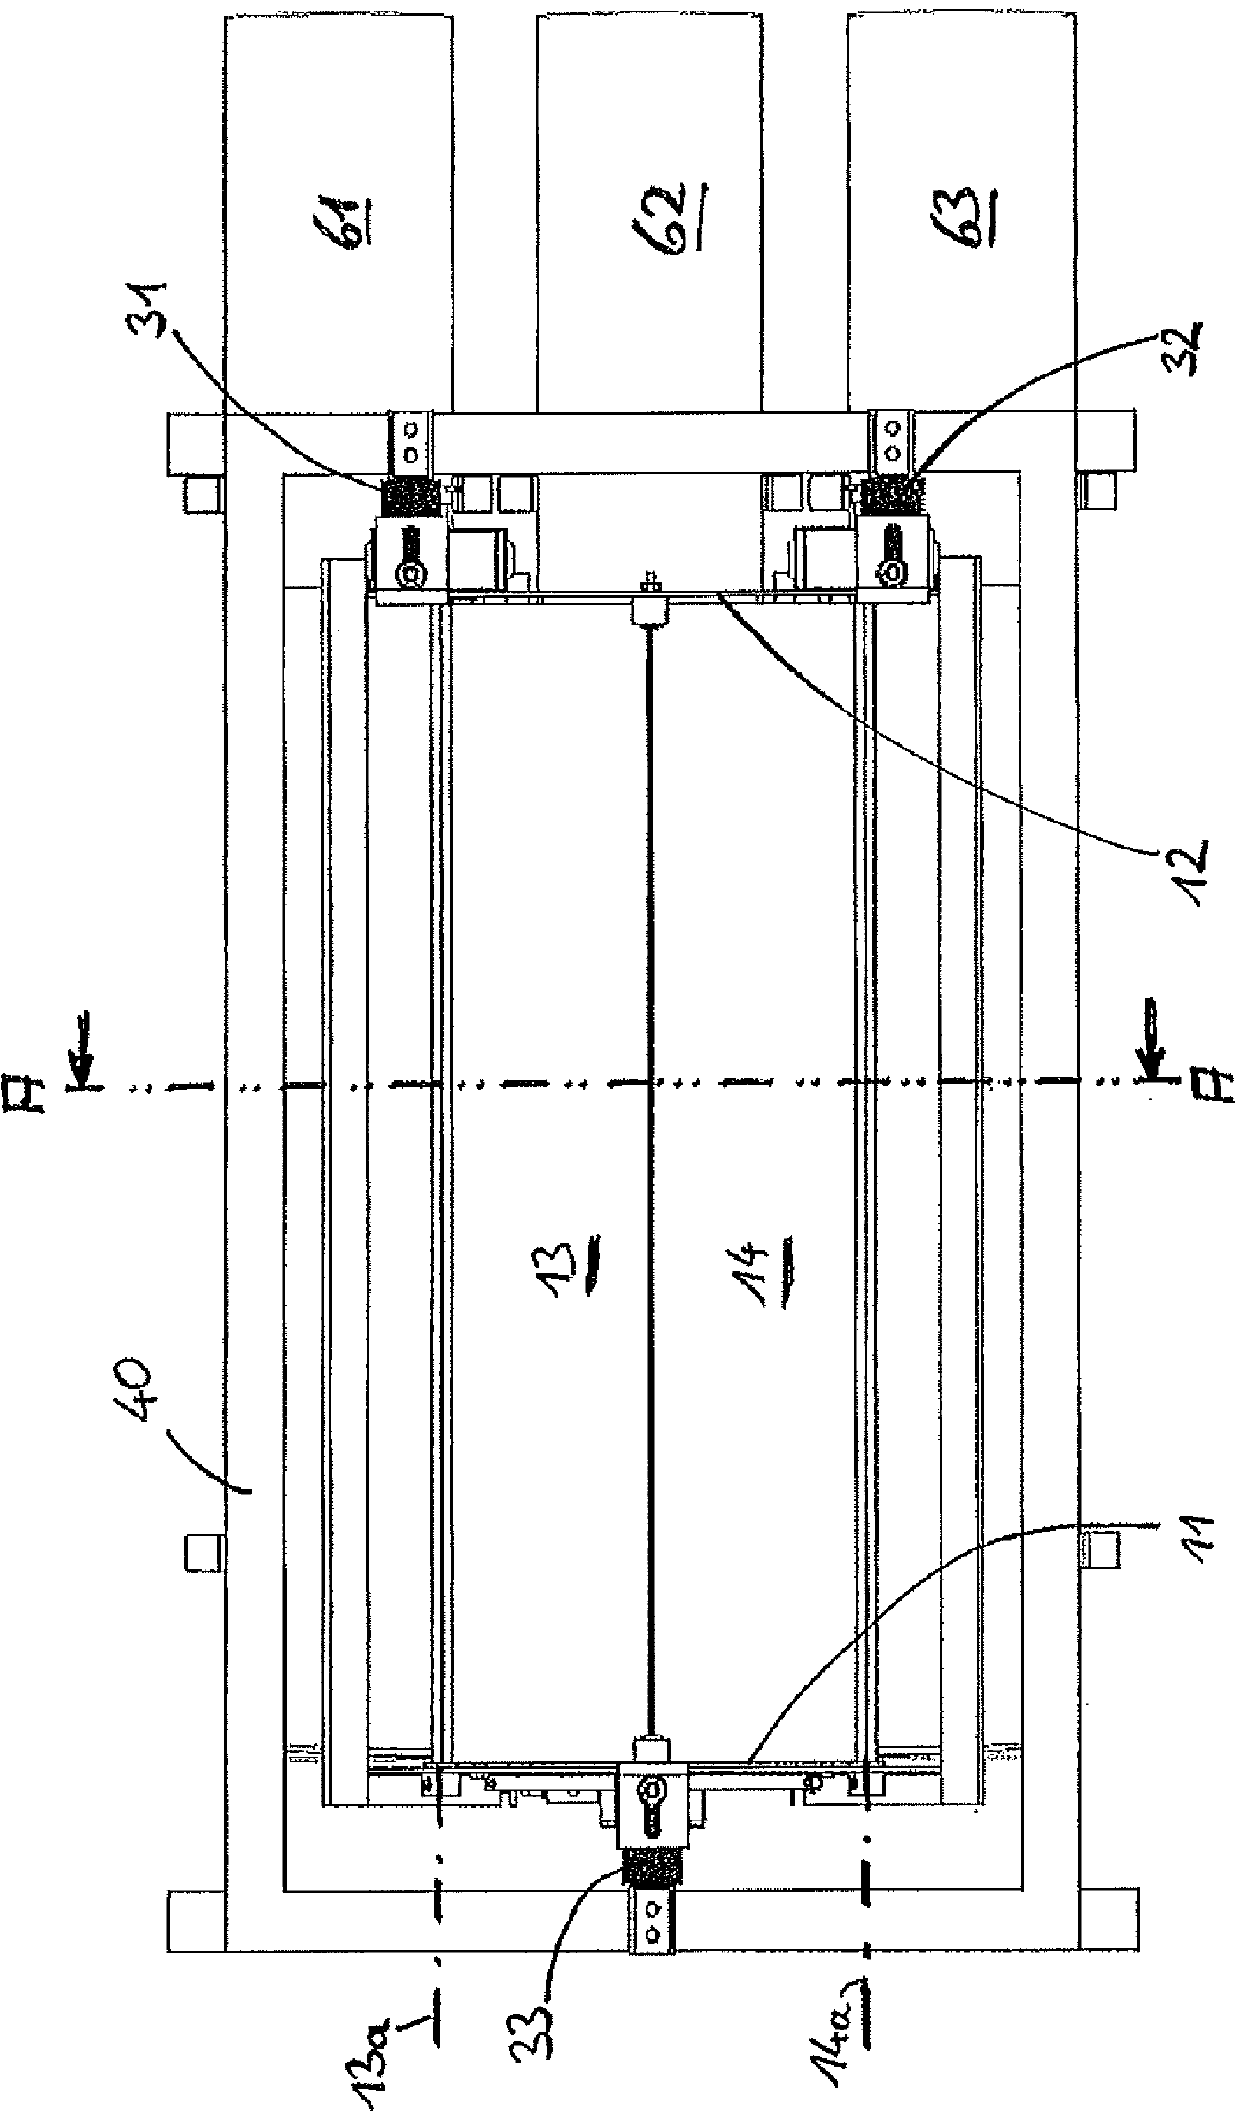 Fish-sorting device and method